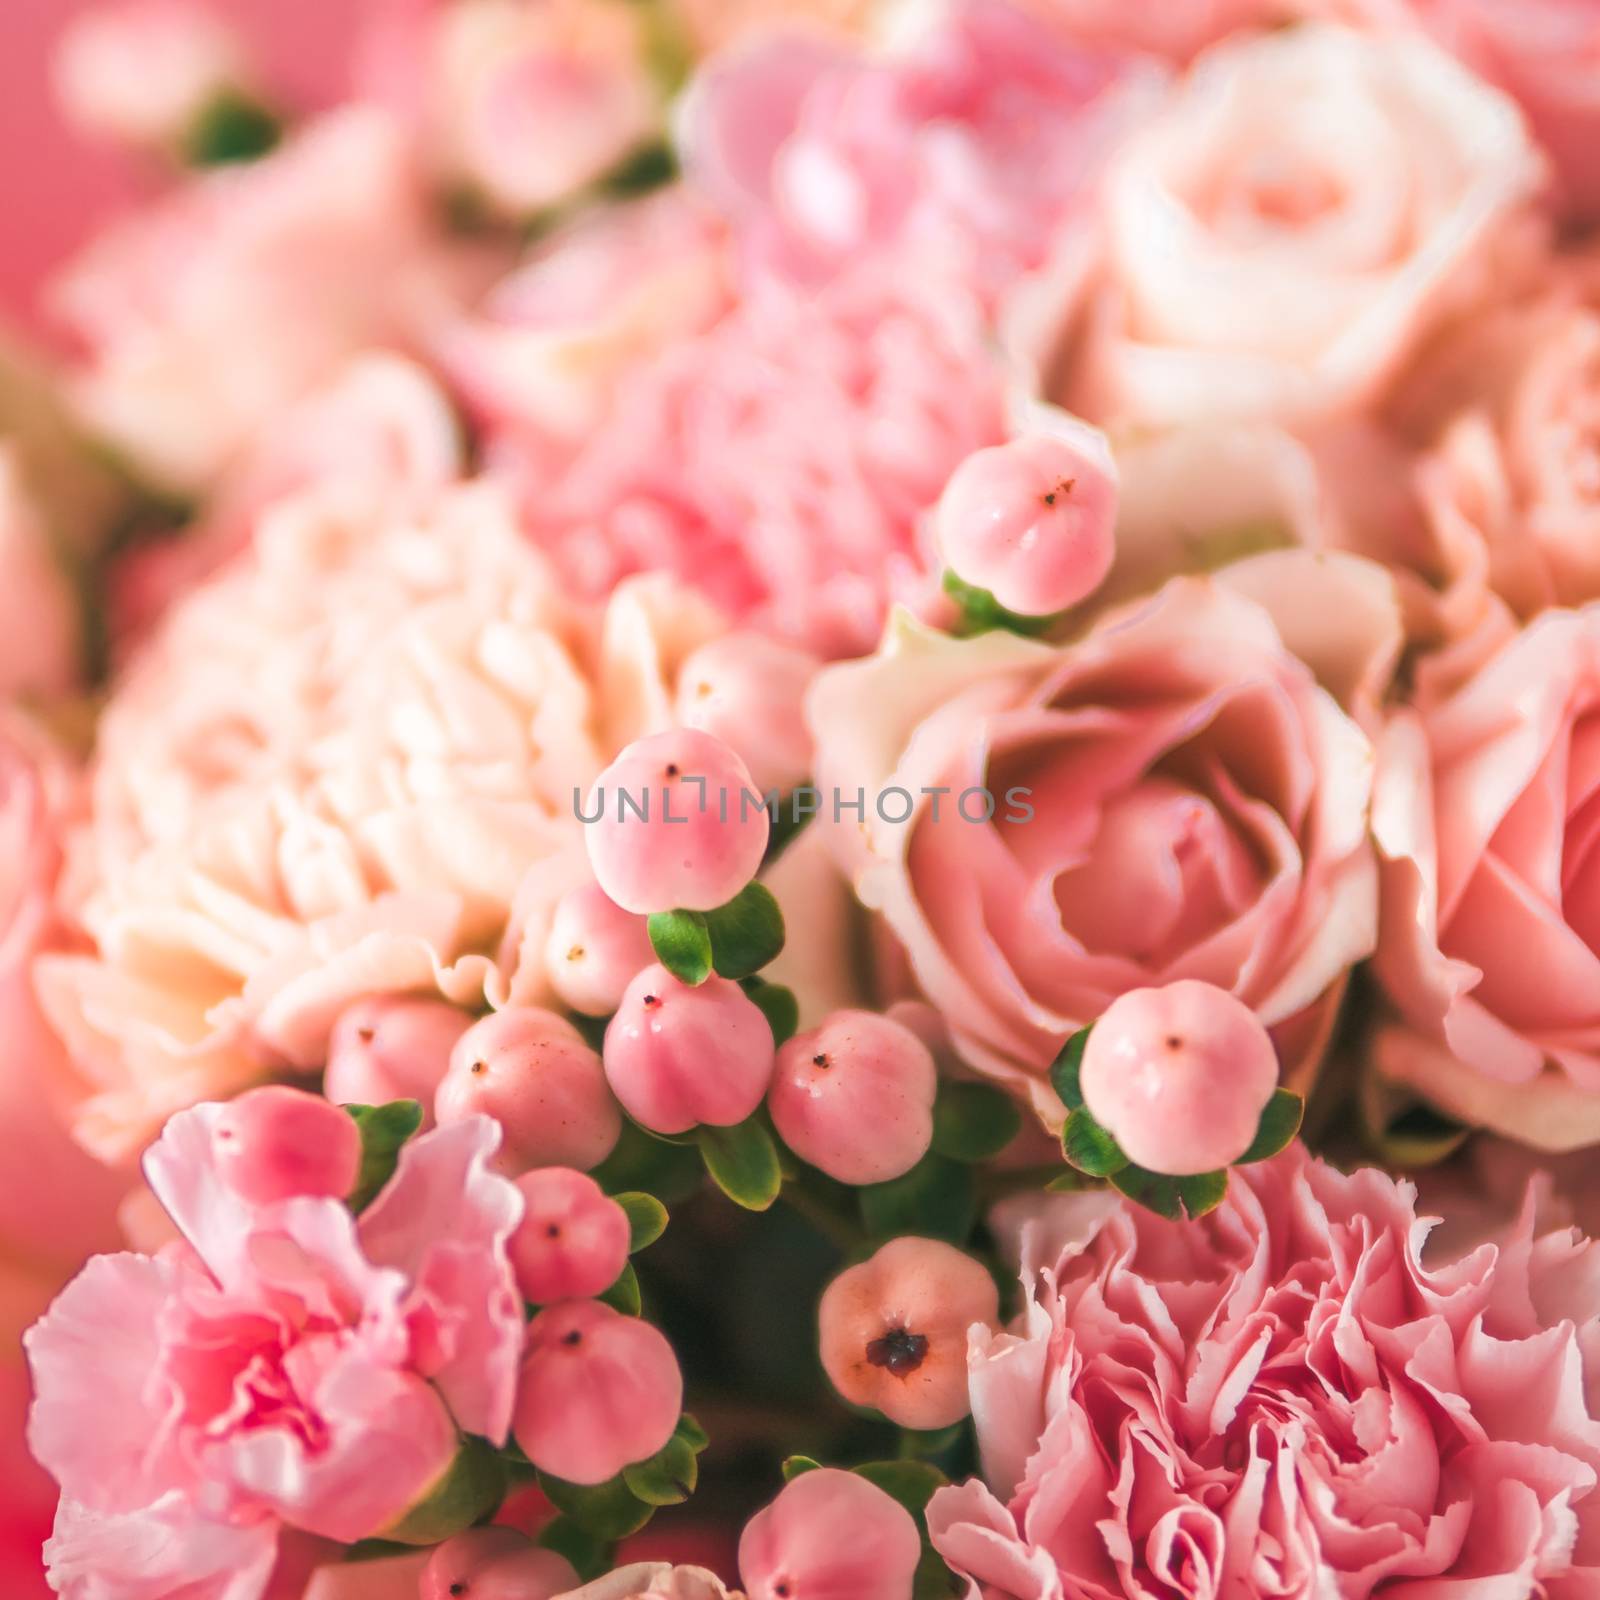 Extreme close up view of nice subtle delicate pink bouquet with roses, dianthus, hypericum, clove. Shallow DOF. Copy space for text. Square format for social media